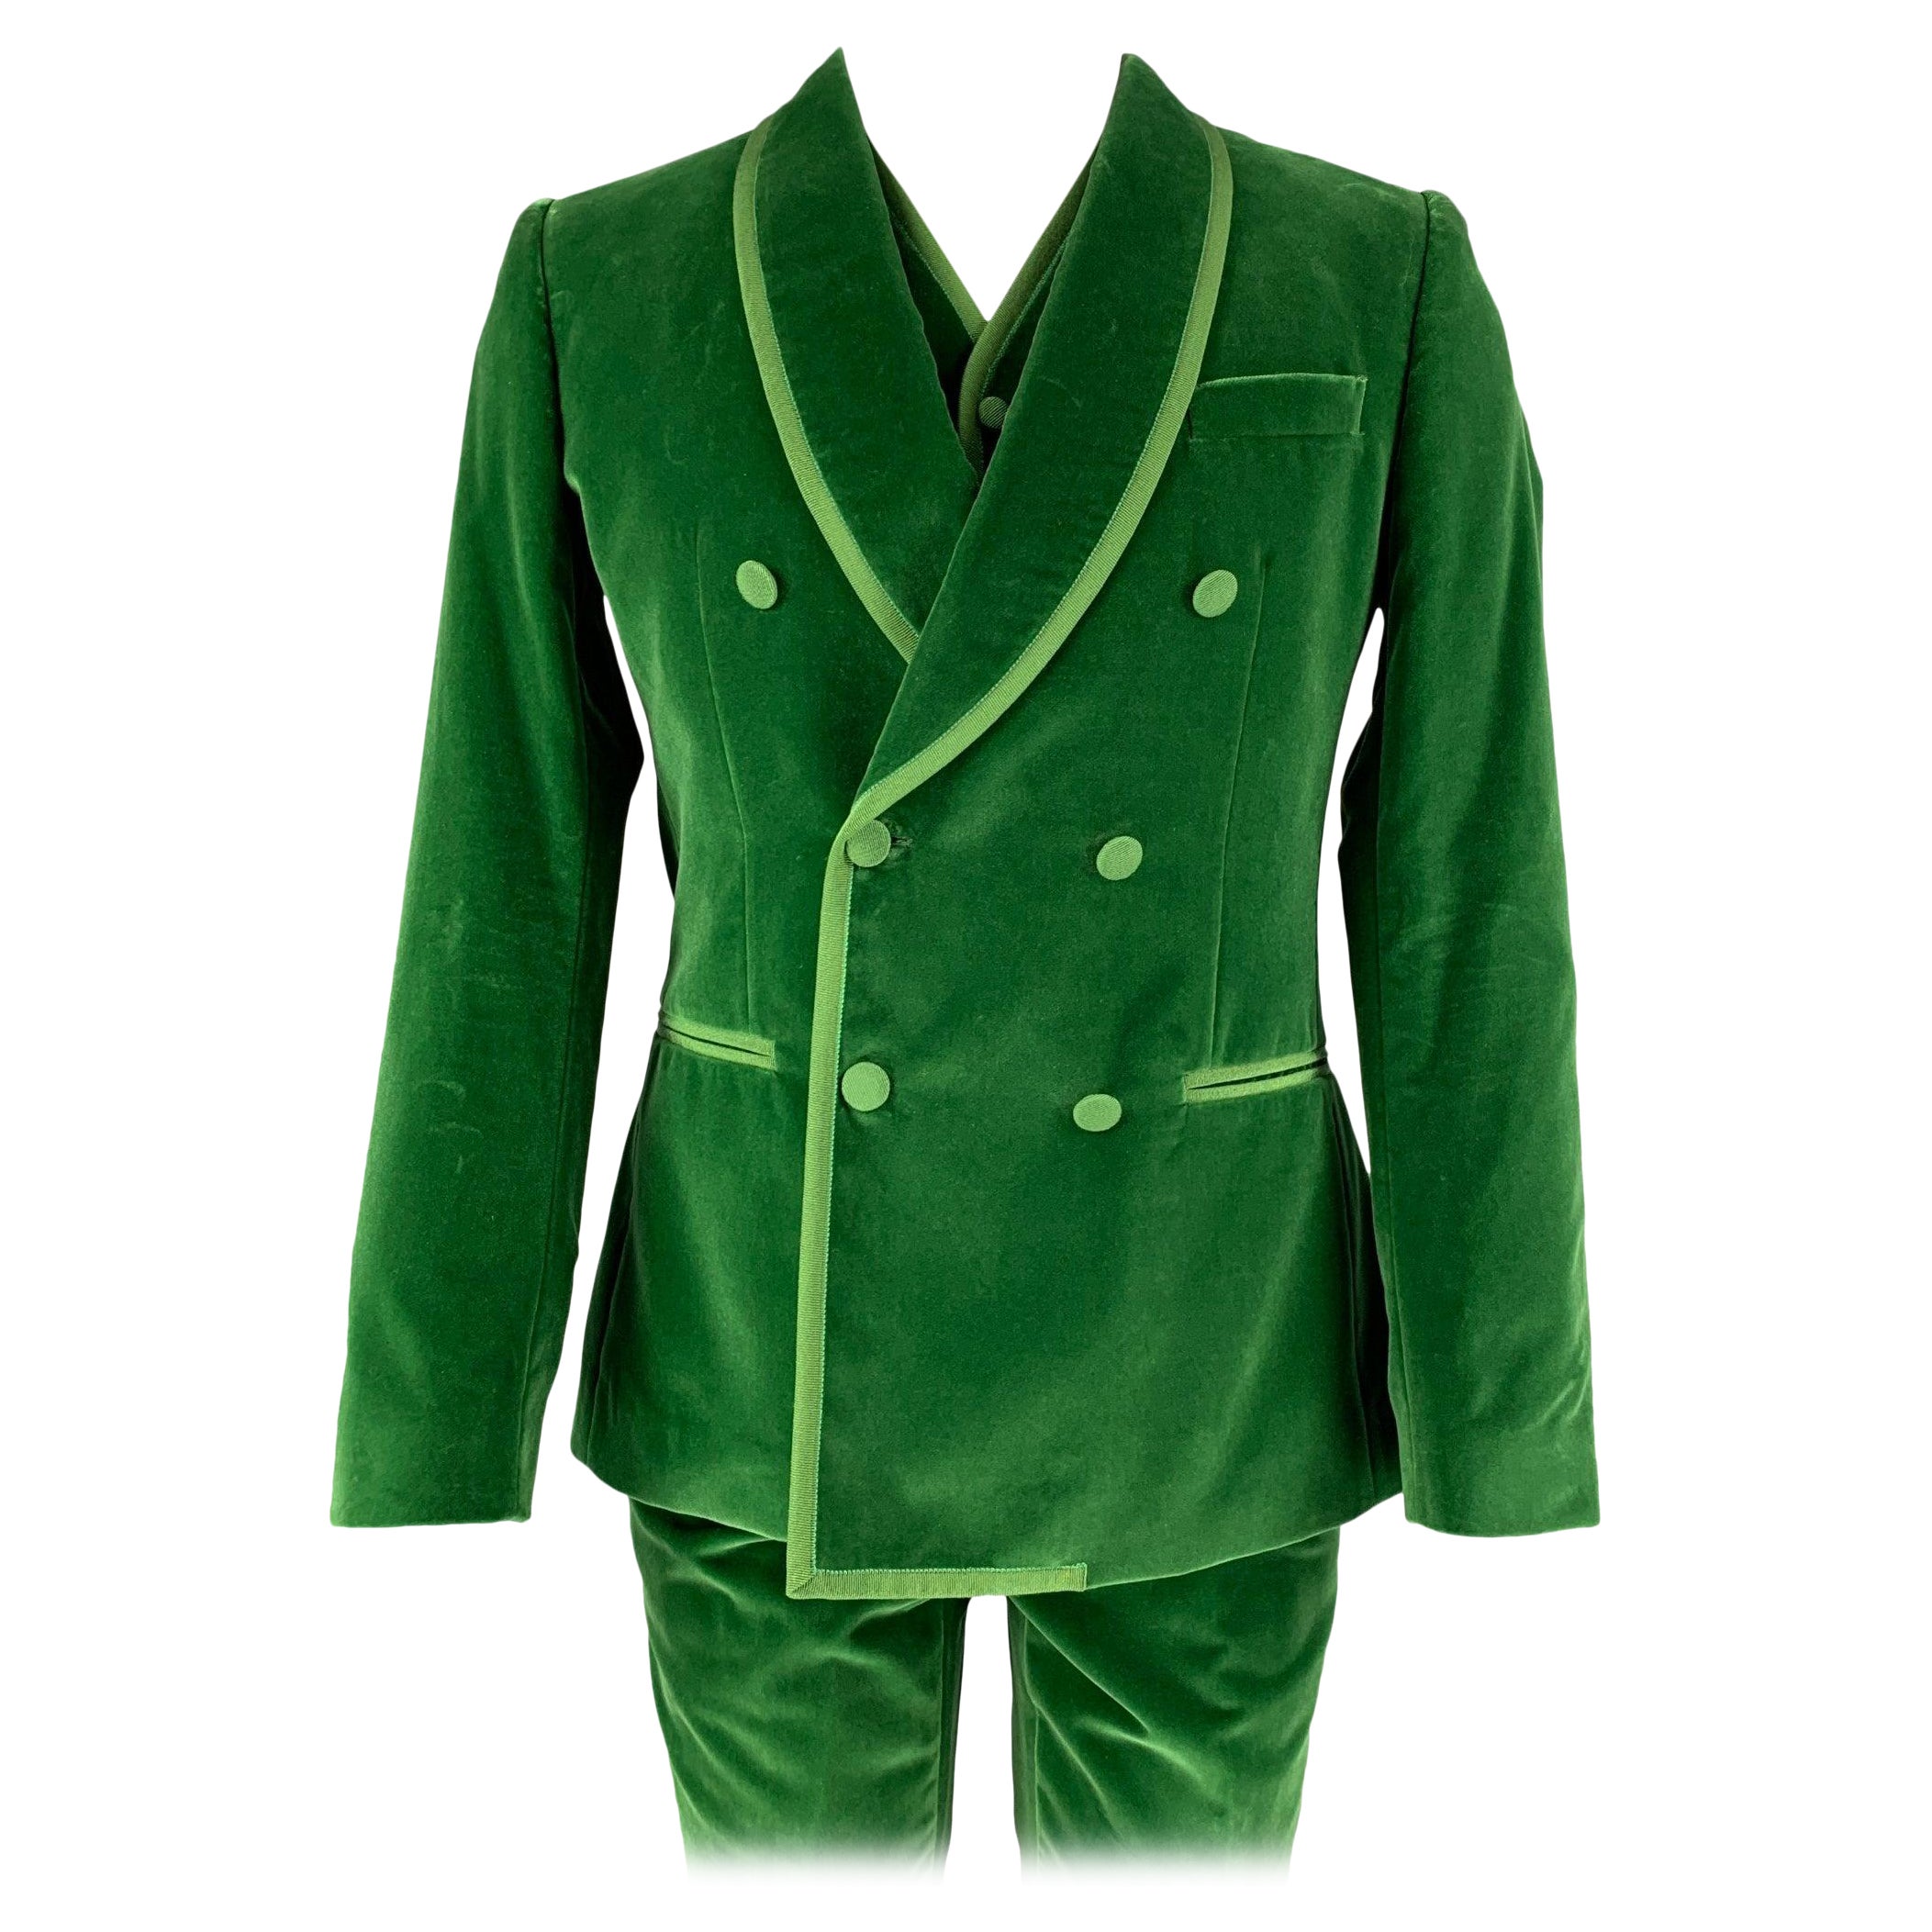 DOLCE & GABBANA Size 36 R Green Velvet Double Breasted Shawl 3 Piece Suit For Sale